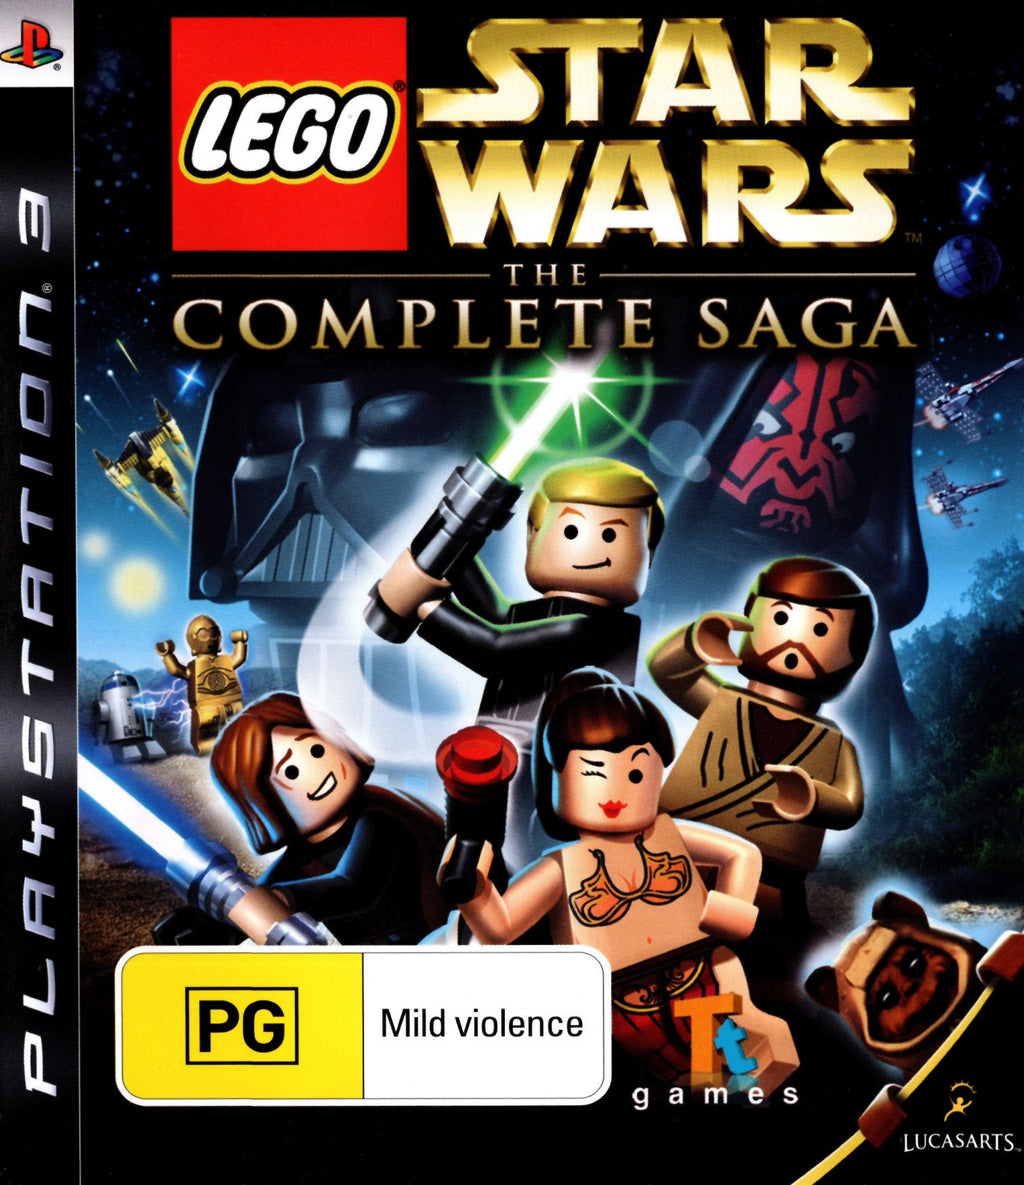 Lego Star Wars The Force Awakens Playstation 3 PS3 Game For Sale